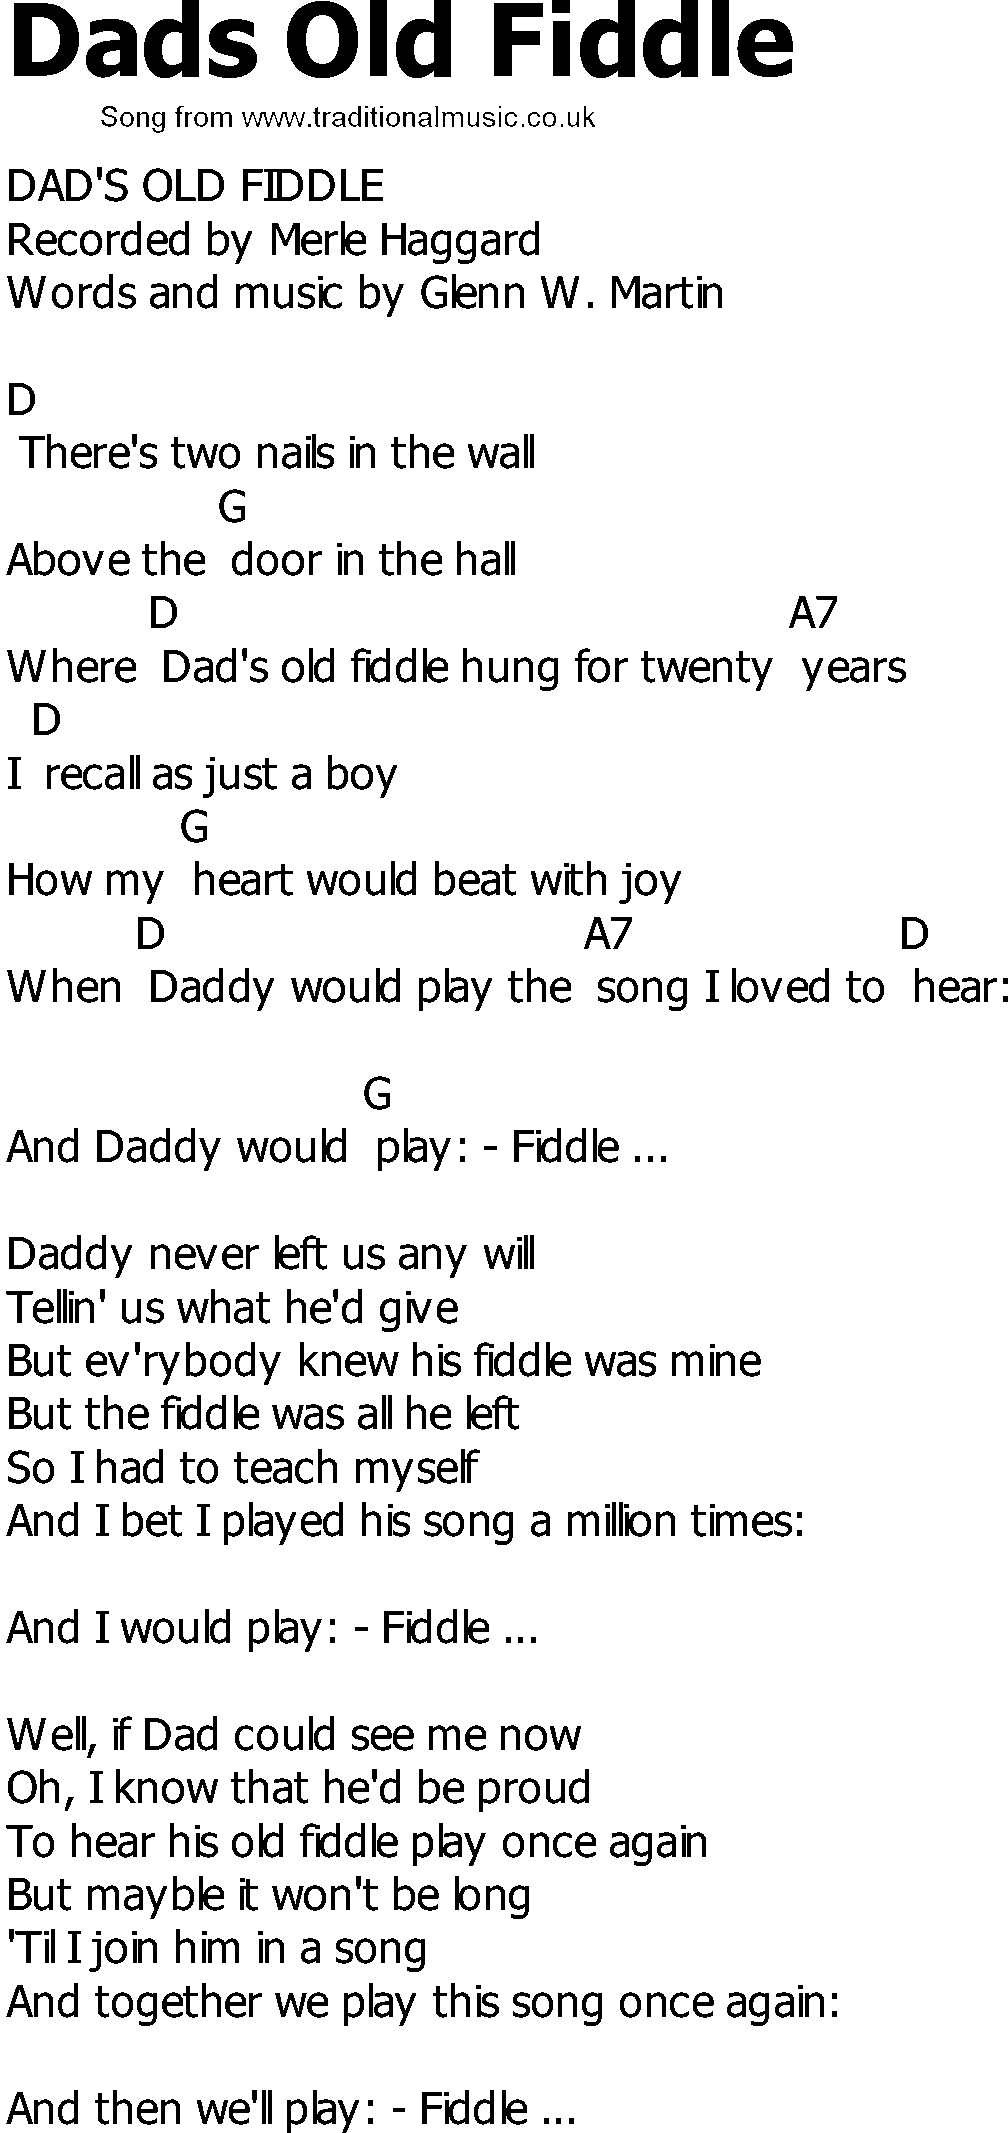 Old Country song lyrics with chords - Dads Old Fiddle